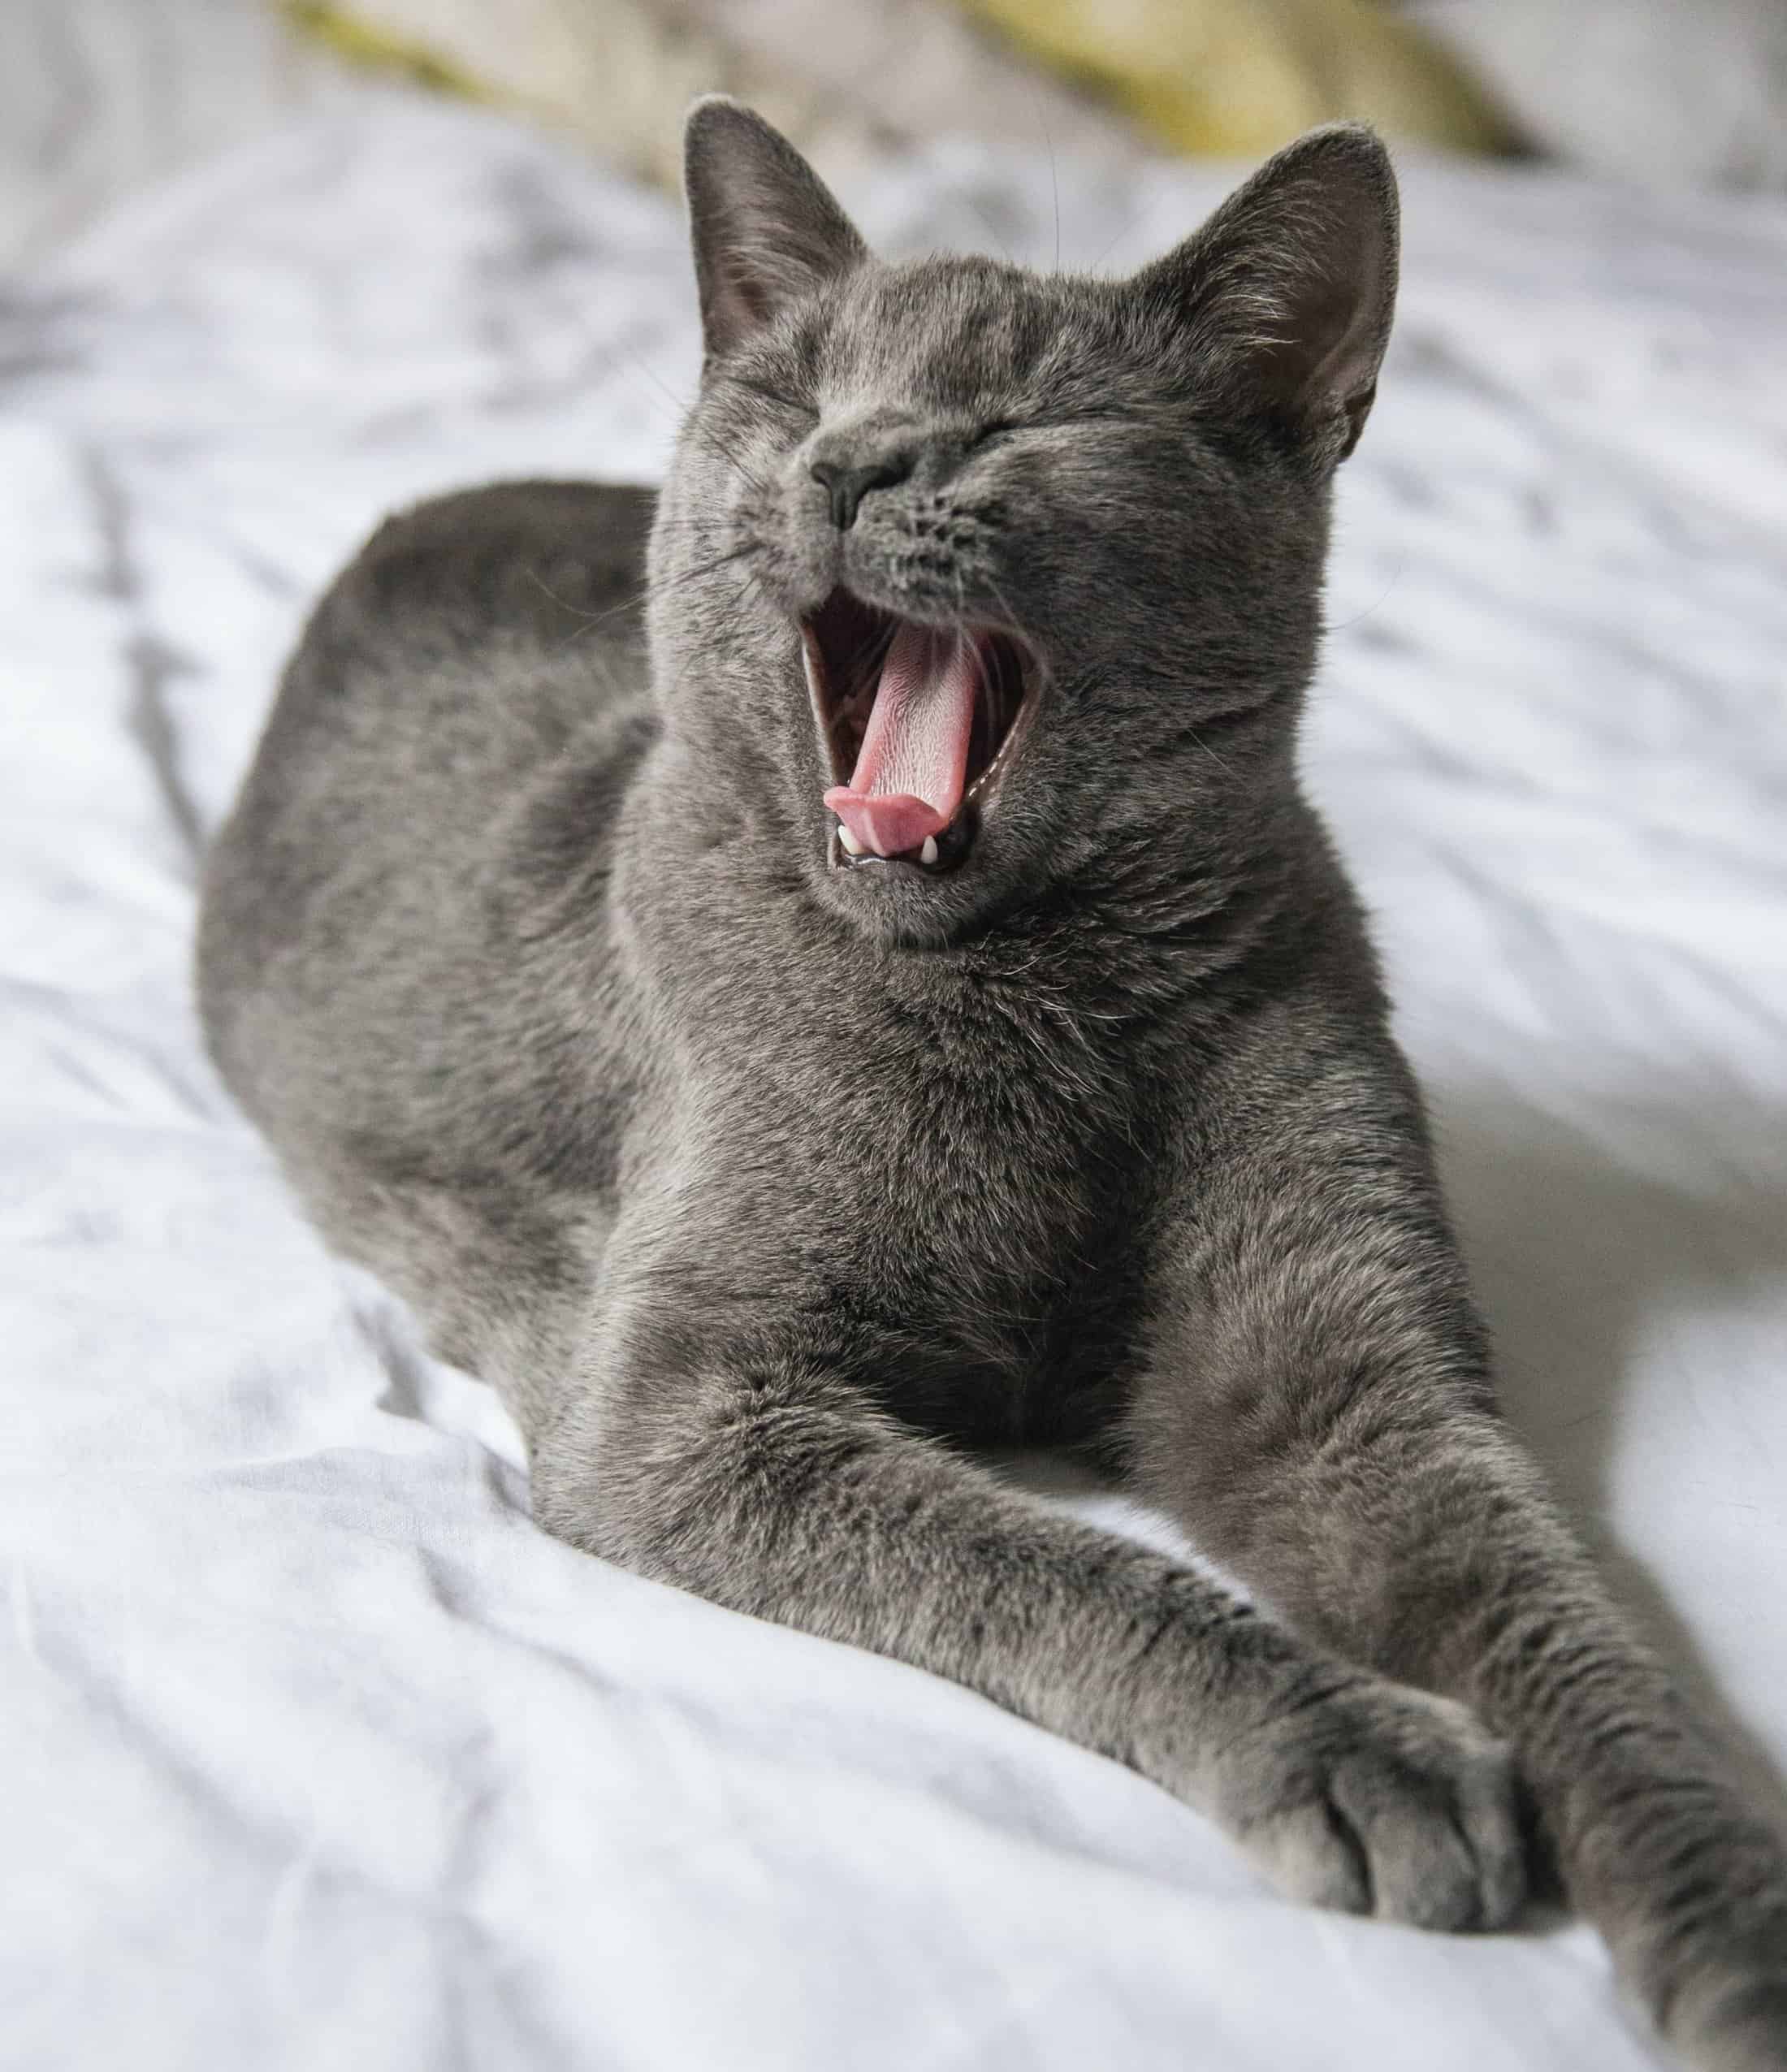 Cat yawning. Why is so much advertising so desperately boring?